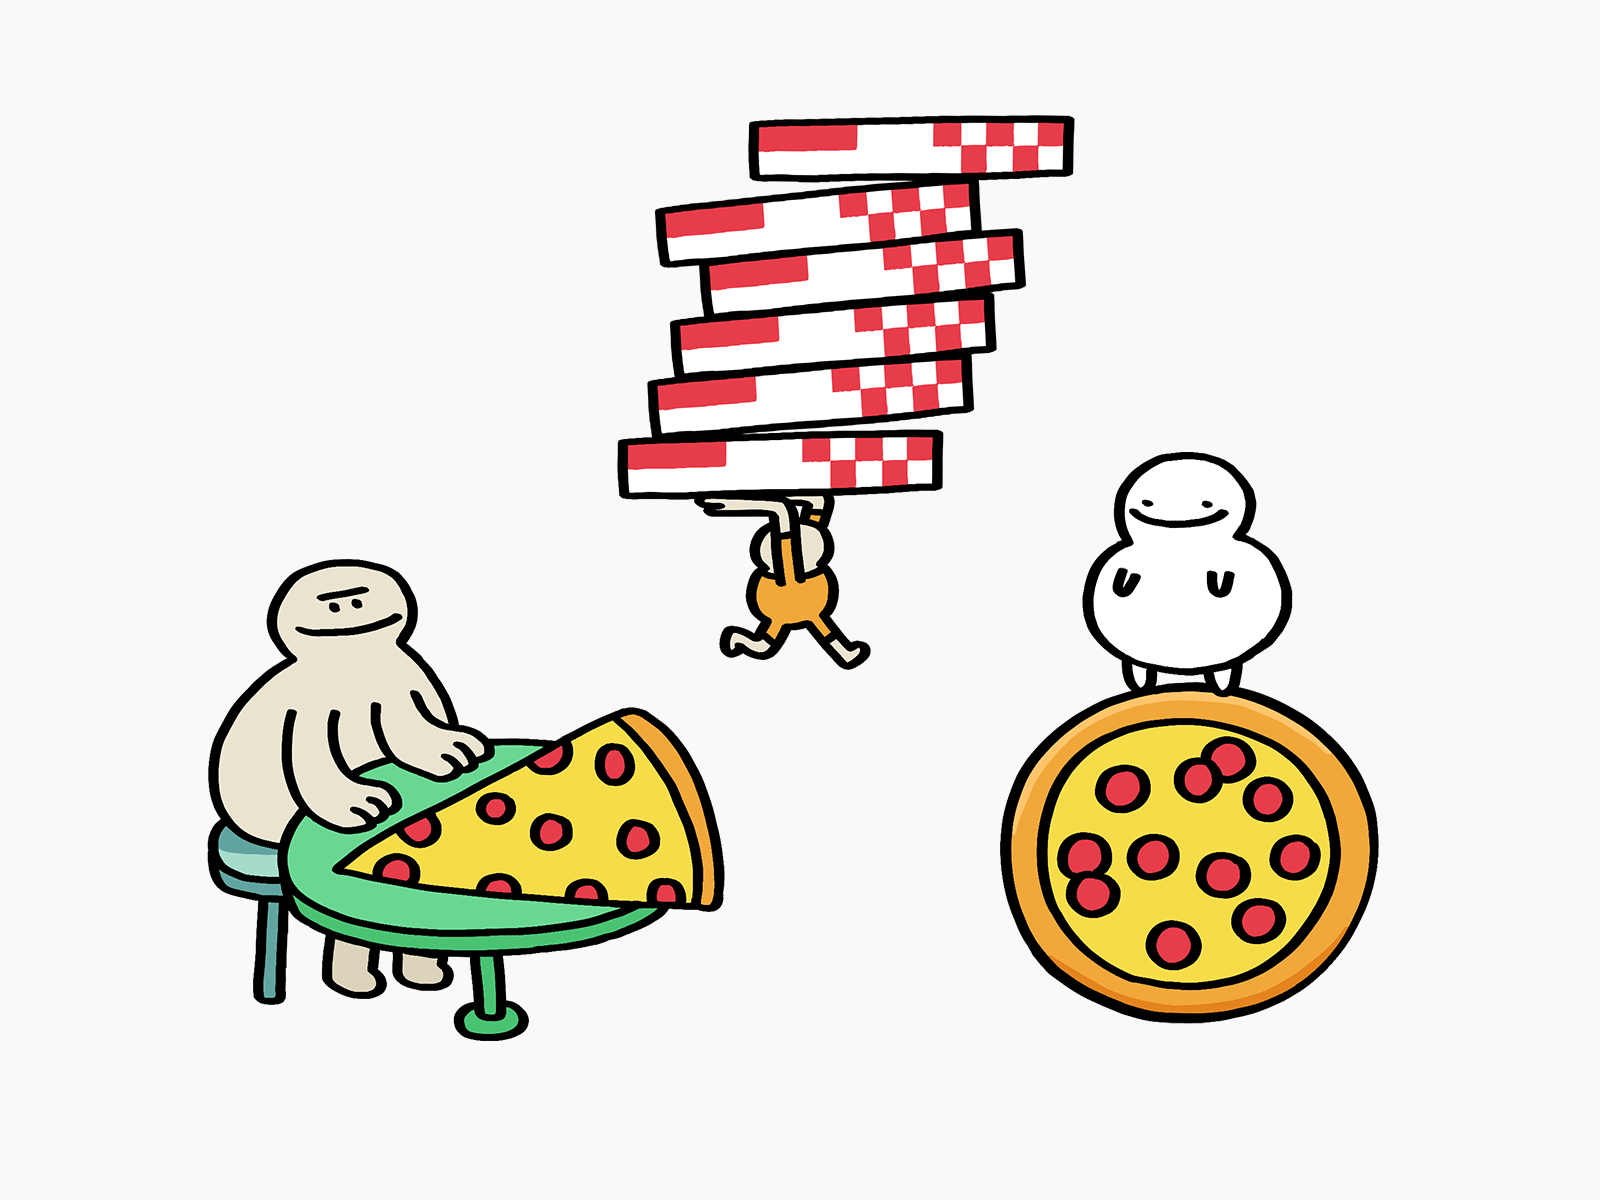 Venmo Stickers: Pizza 2d animation animation frame by frame holler illustration photoshop photoshop animation pizza stickers venmo